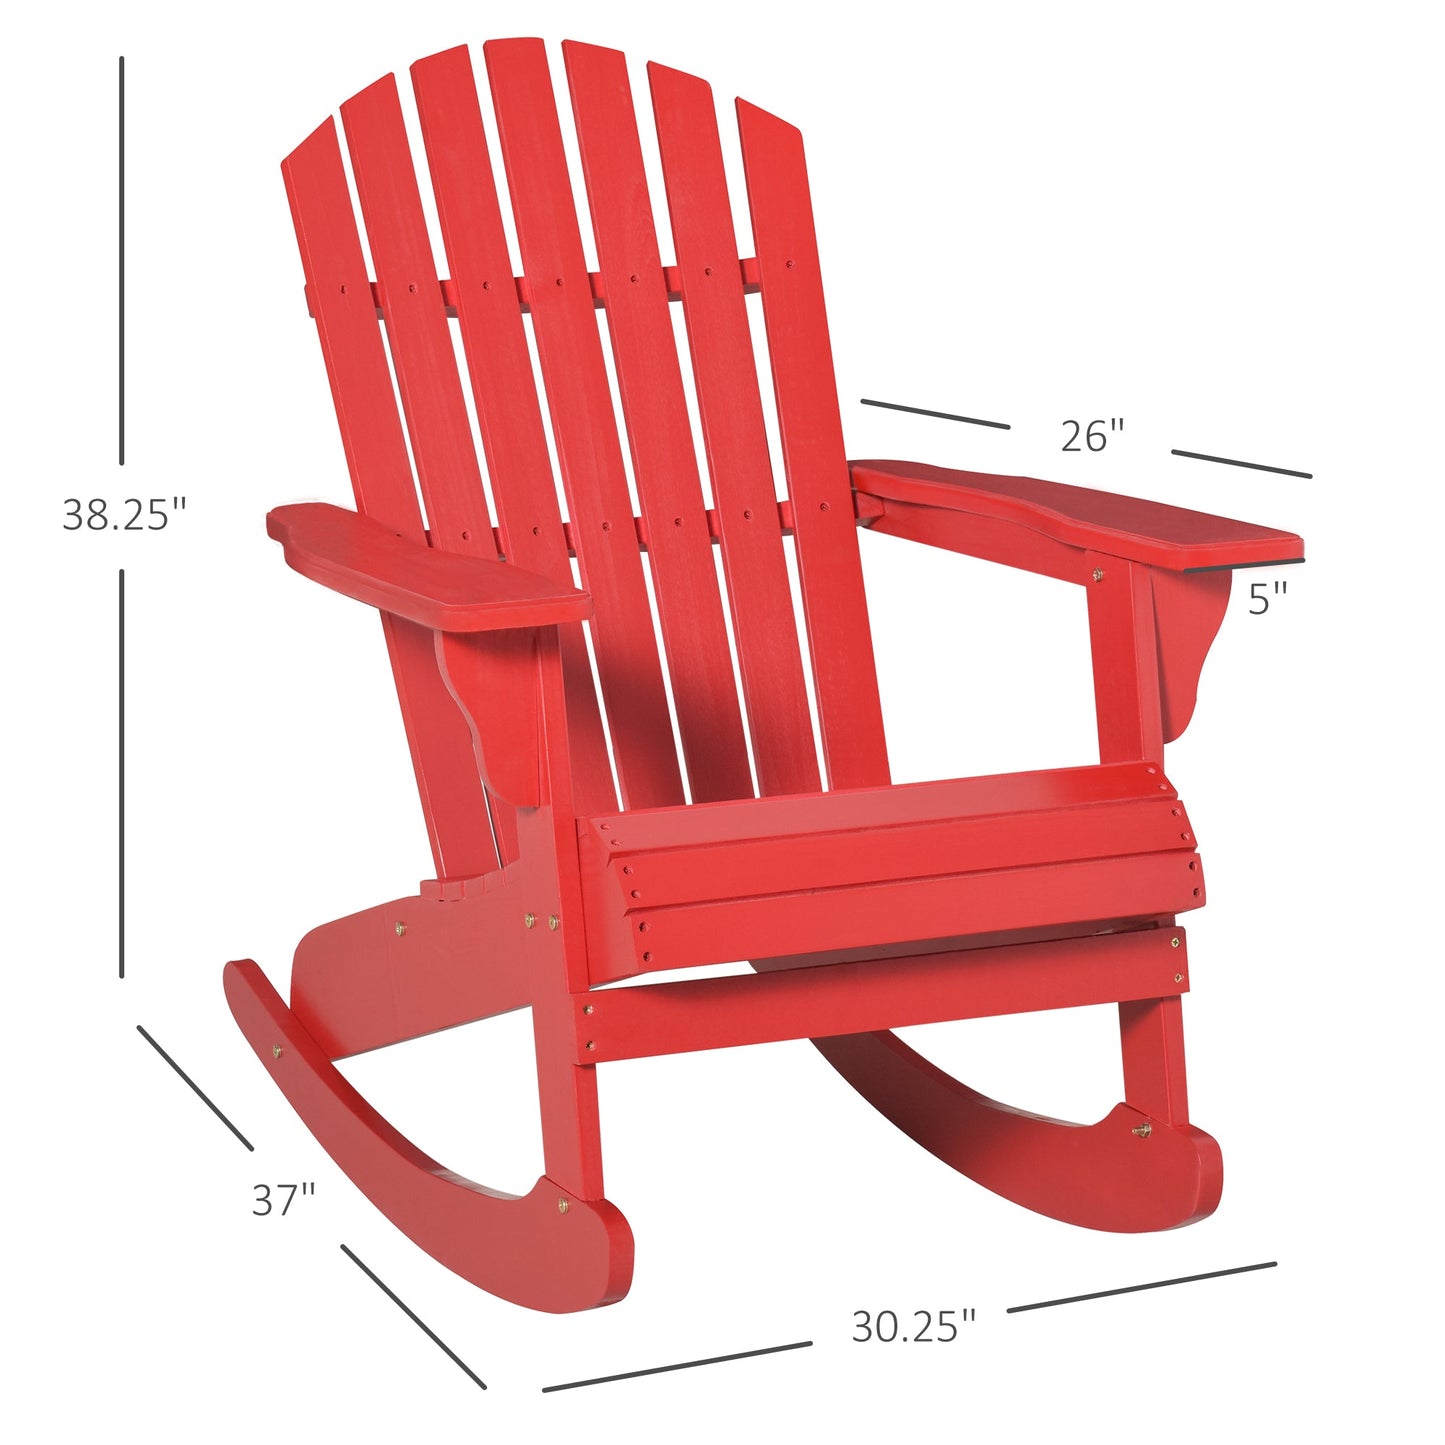 Outdoor and Garden-Wooden Adirondack Rocking Chair Outdoor Lounge Chair Fire Pit Seating with Slatted Wooden Design, Fanned Back for Patio, Lawn Red - Outdoor Style Company